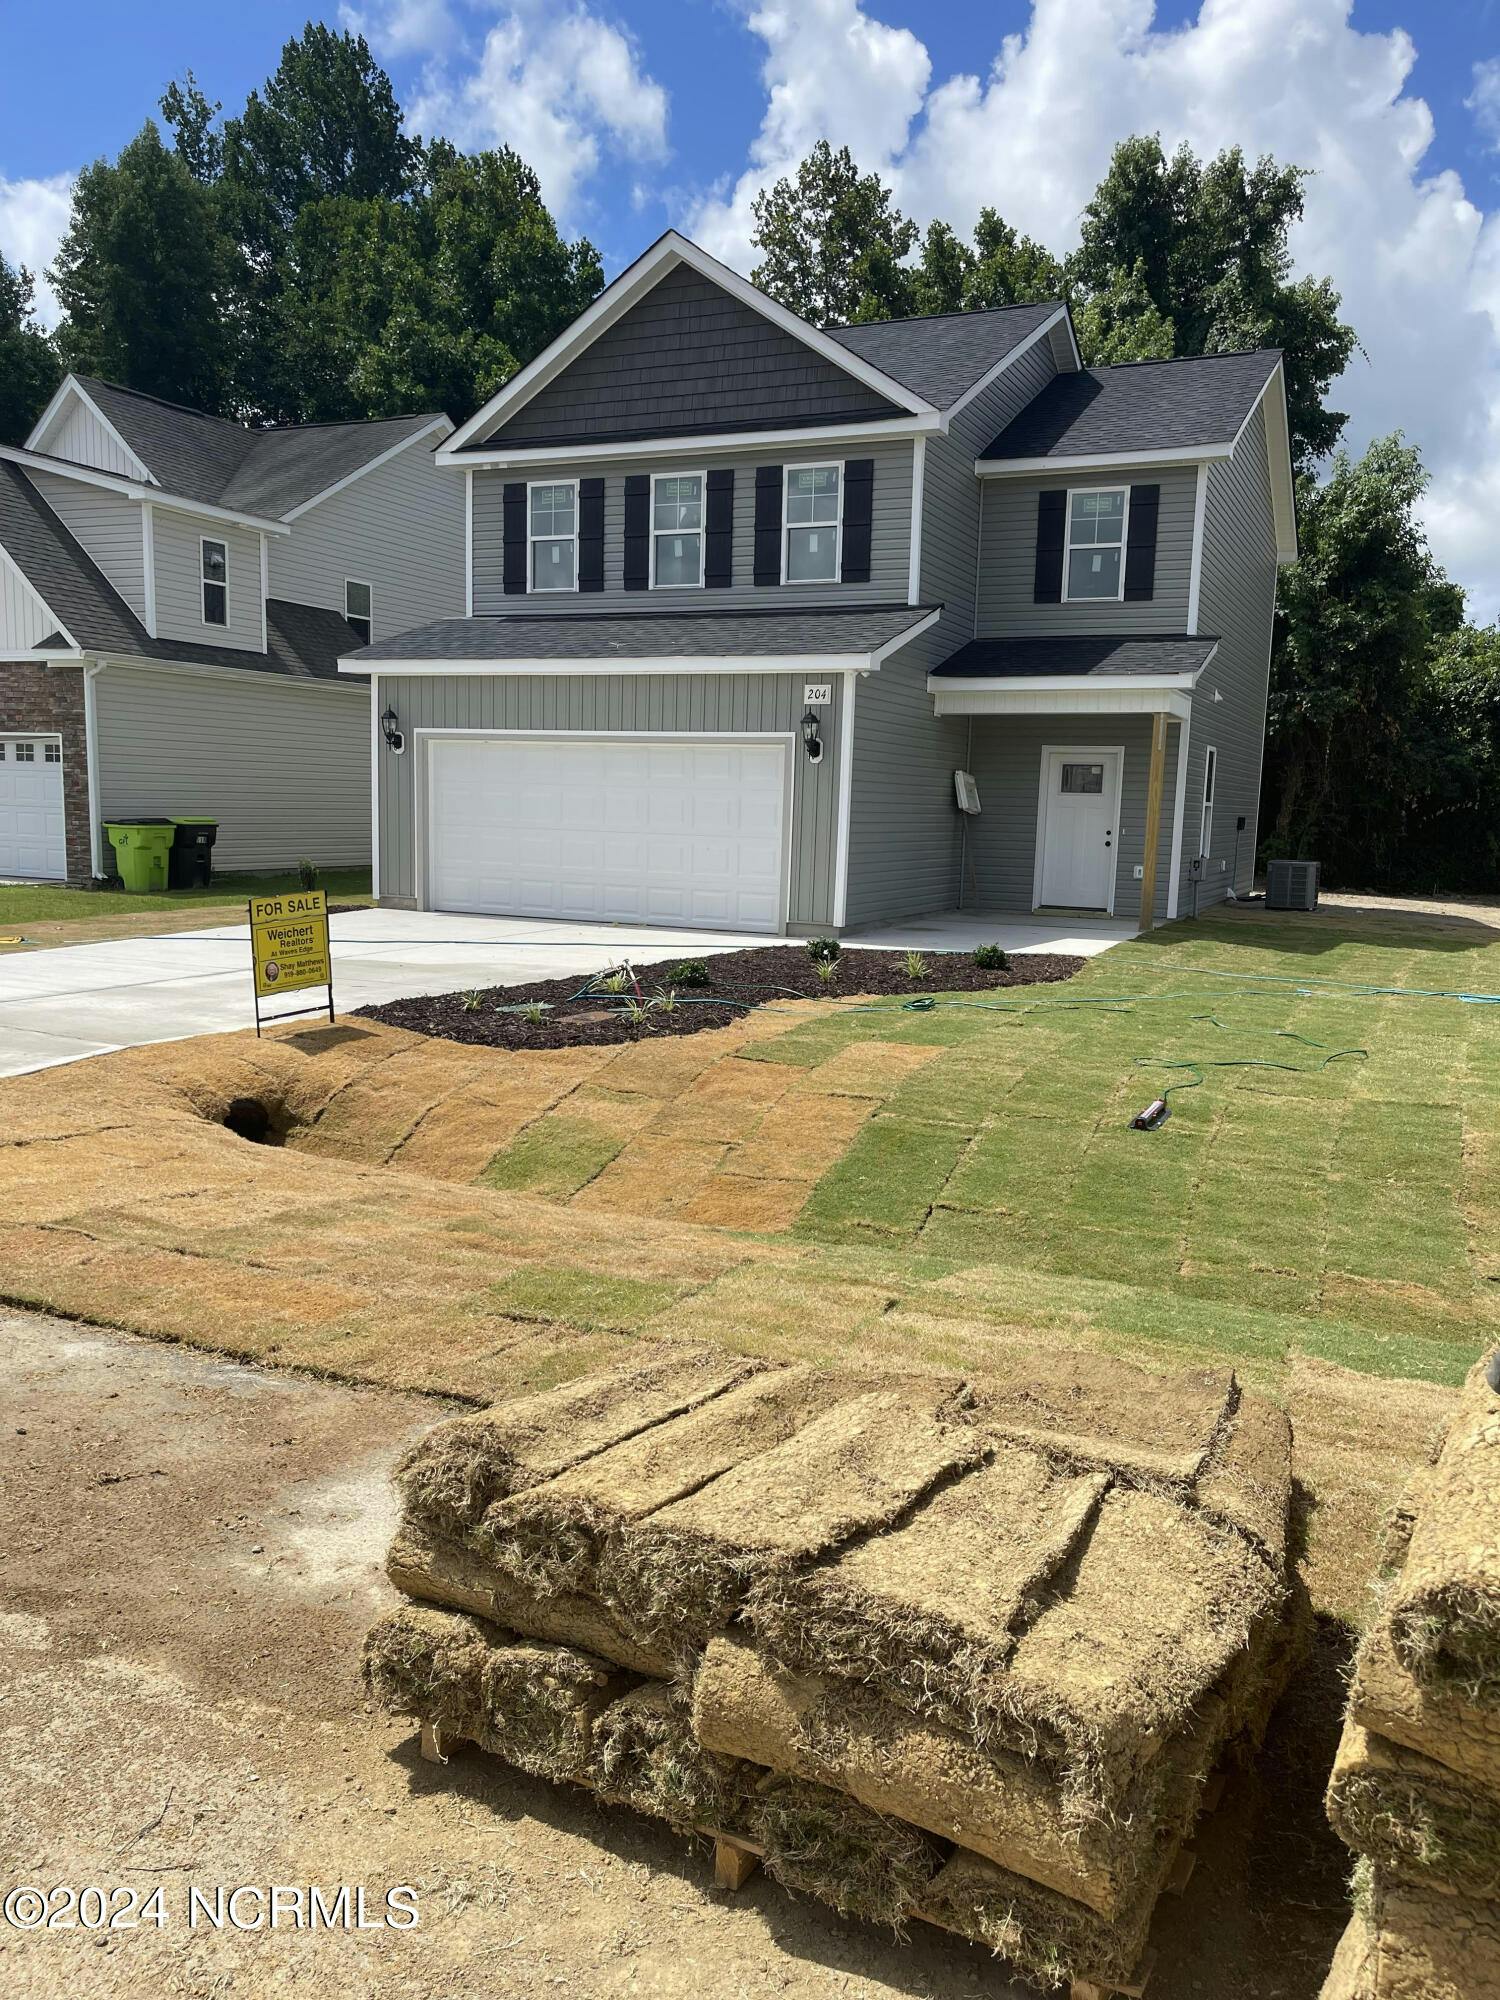 204 updated pictures with landscaping